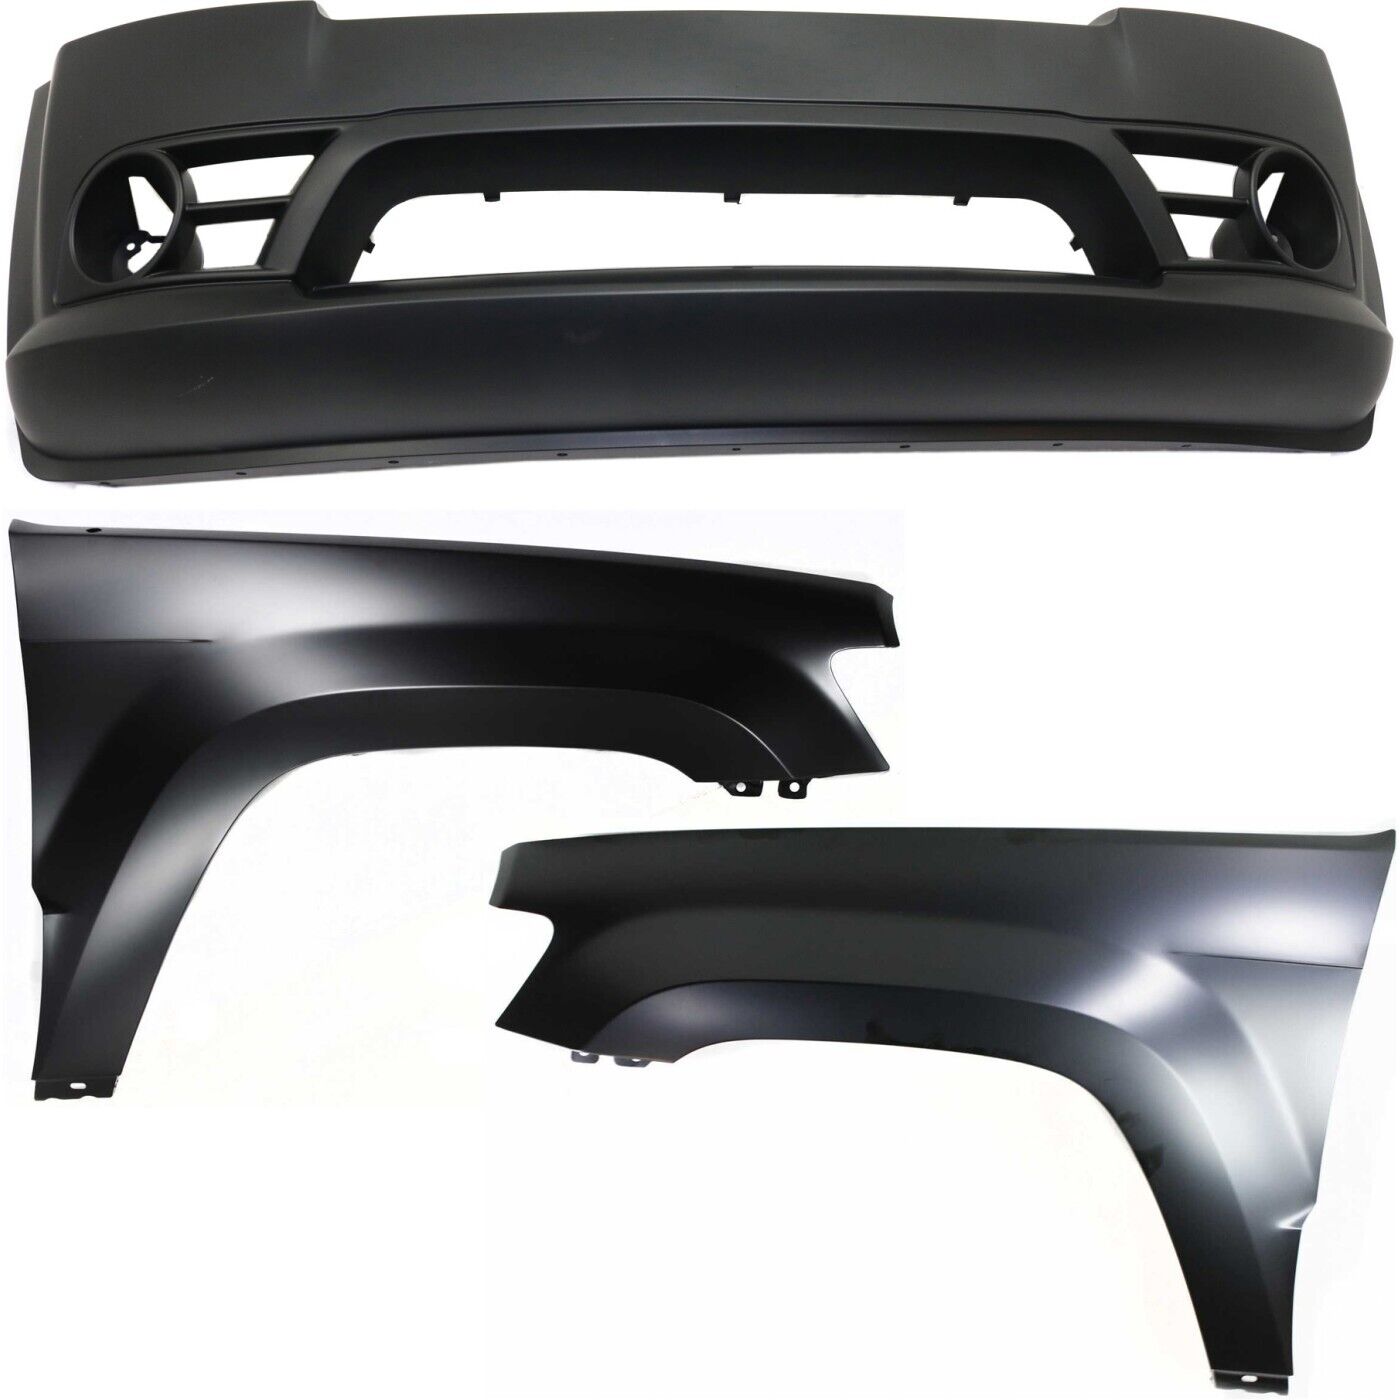 Bumper Cover Kit For 2006-2008 Jeep Grand Cherokee SRT-8 Model Front 3Pc